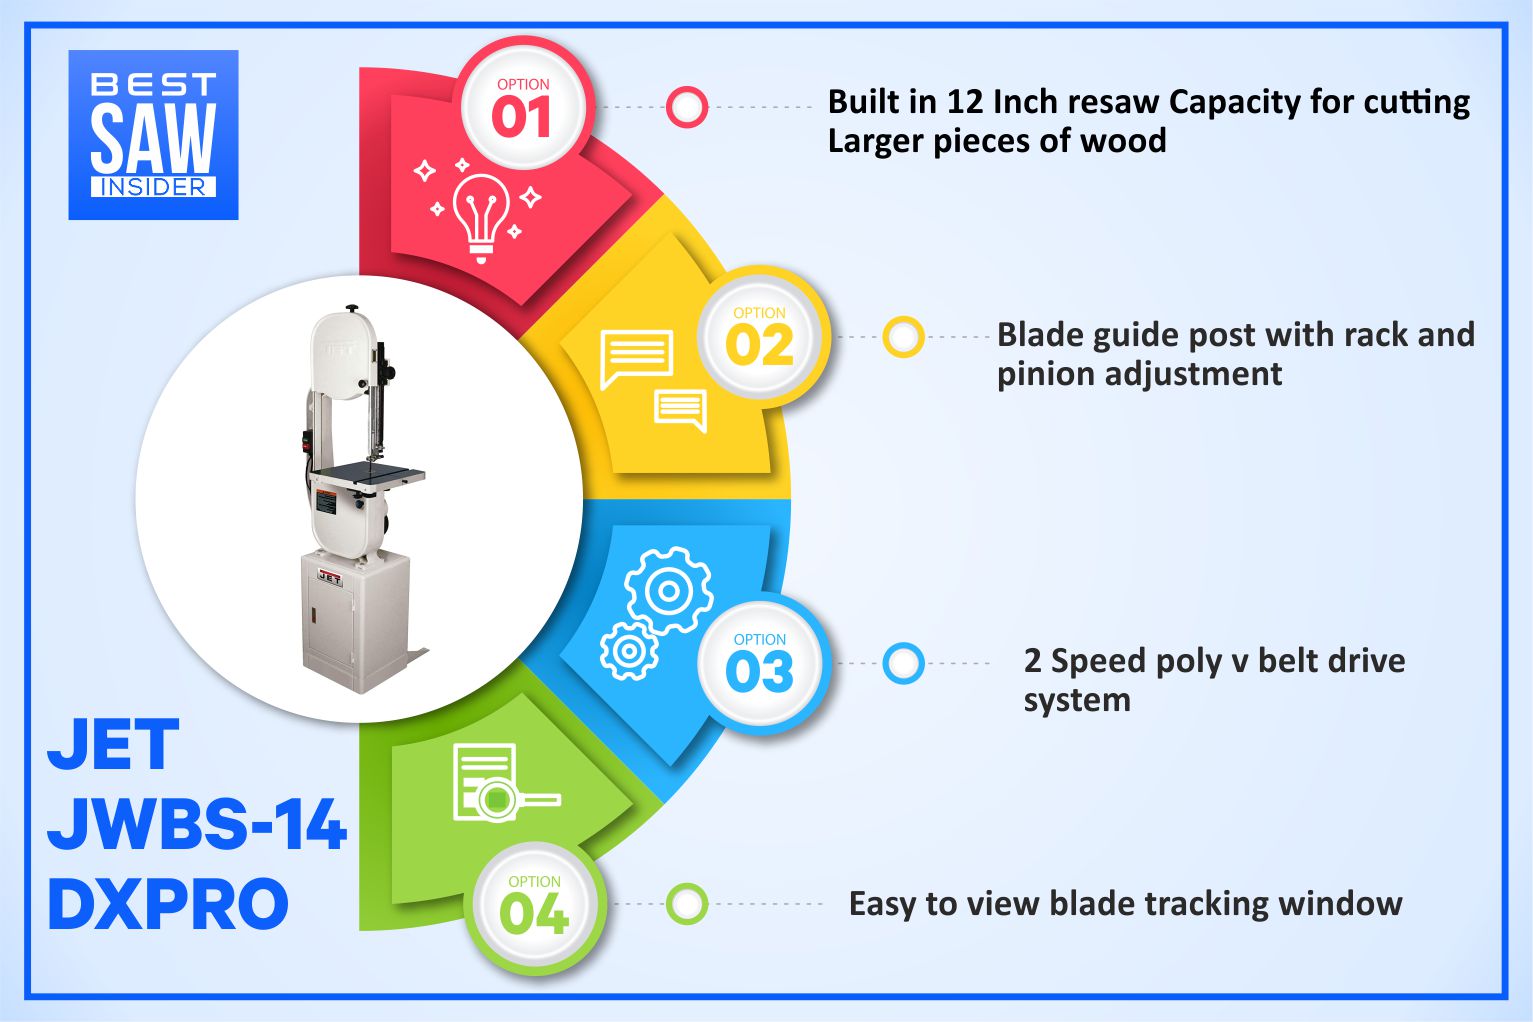 JET JWBS – 14DXPRO - Best Band Saw for Metal infographic details